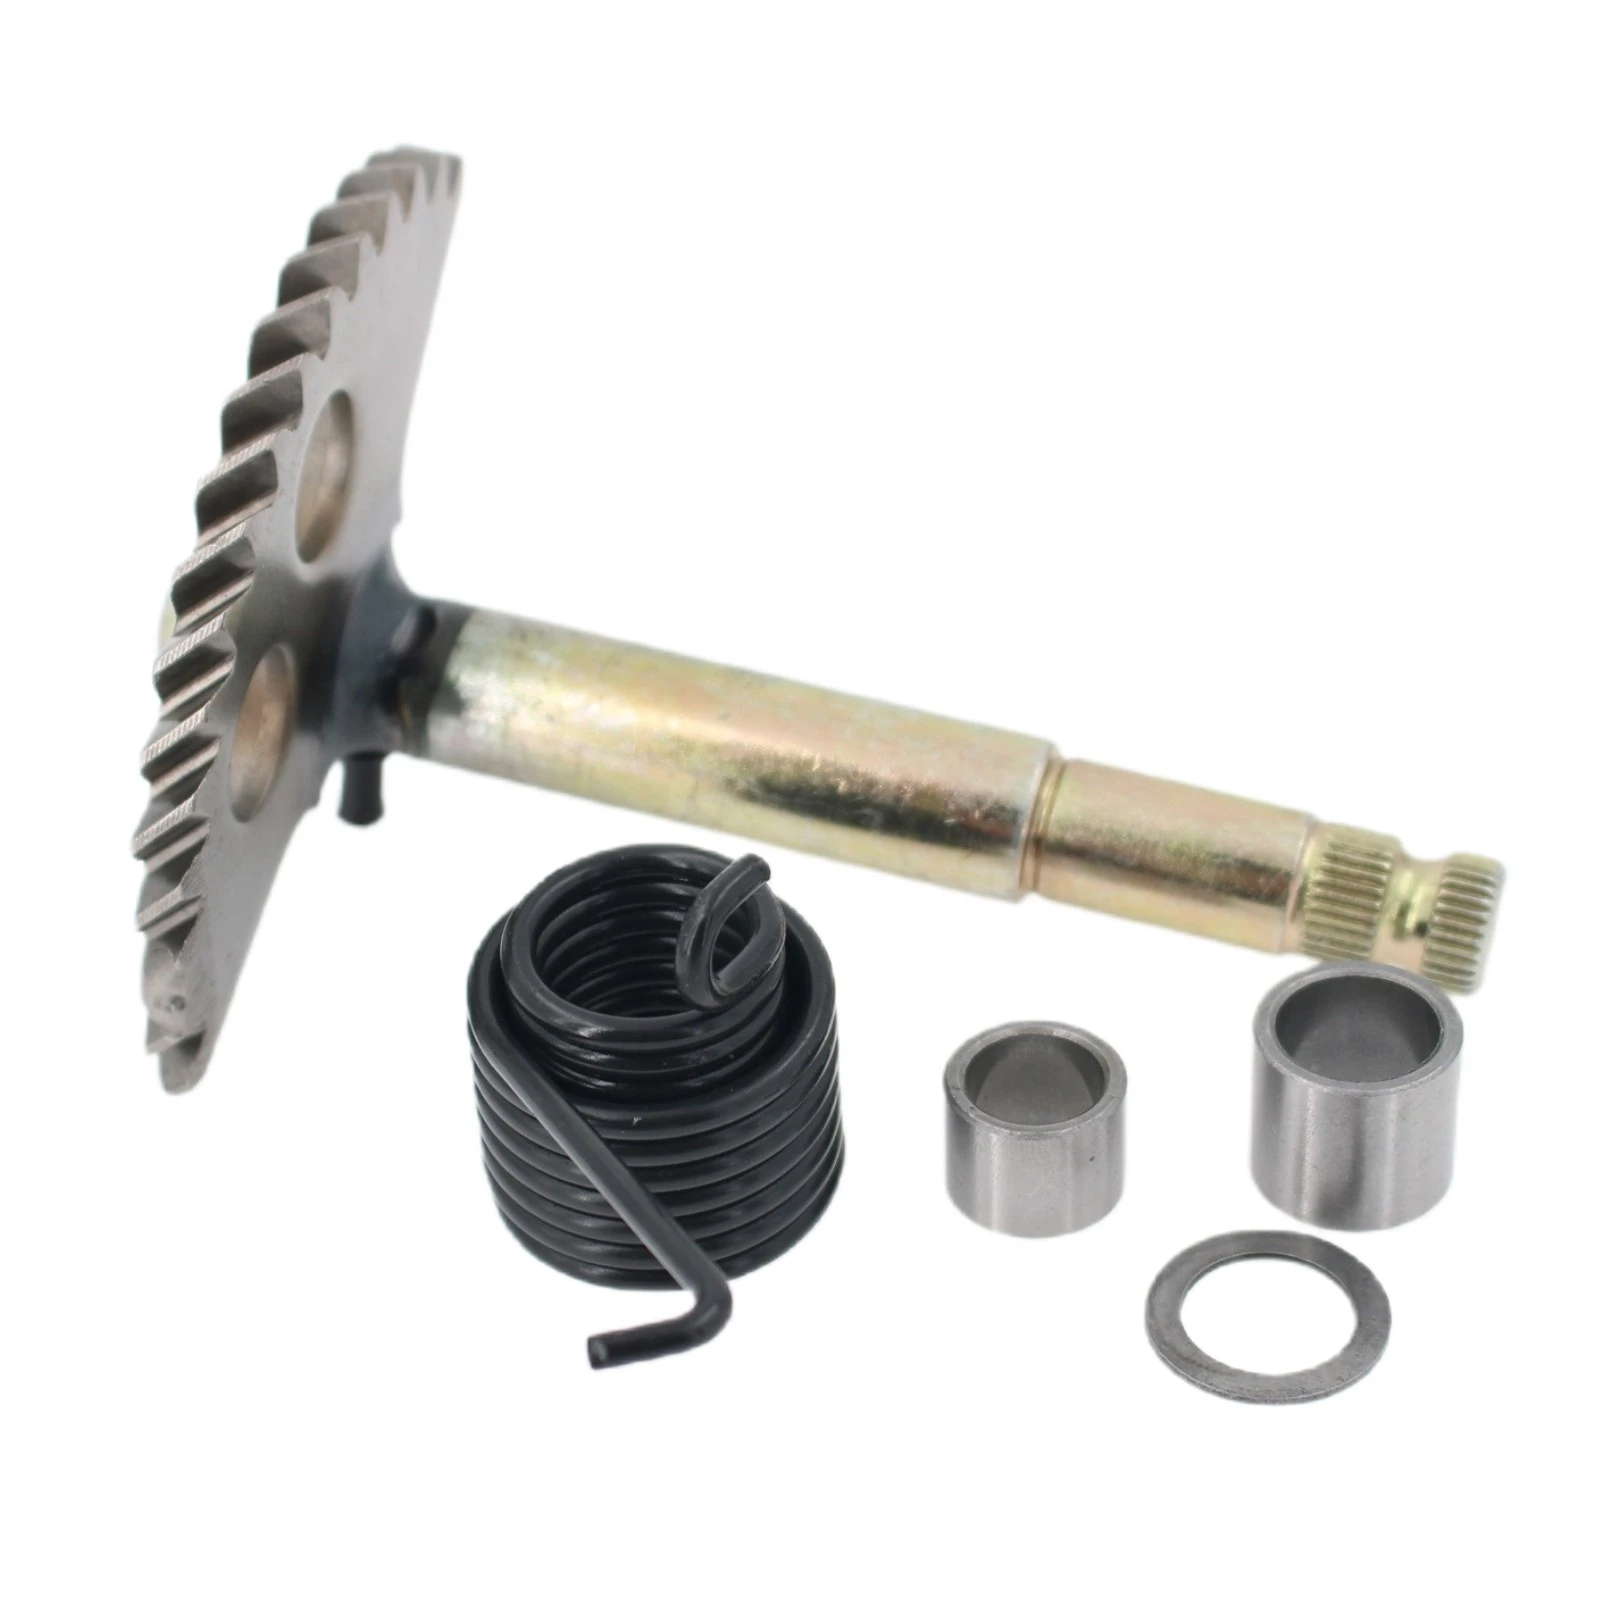 129mm Kick Start Shaft Gear Spindle Für GY6 125cc 150cc Chinese Moped Scooter